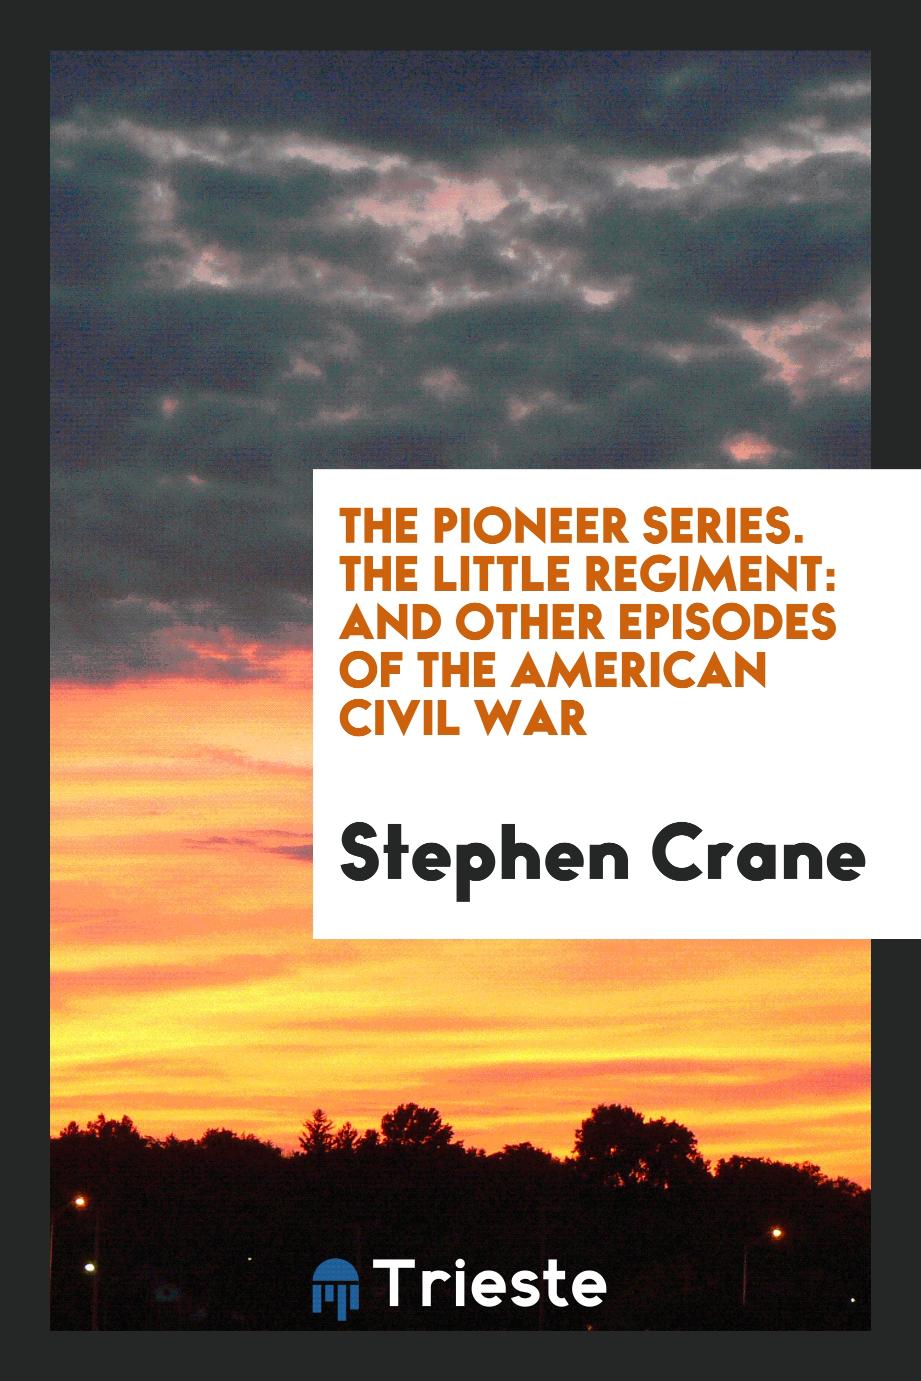 The Pioneer Series. The Little Regiment: And Other Episodes of the American Civil War